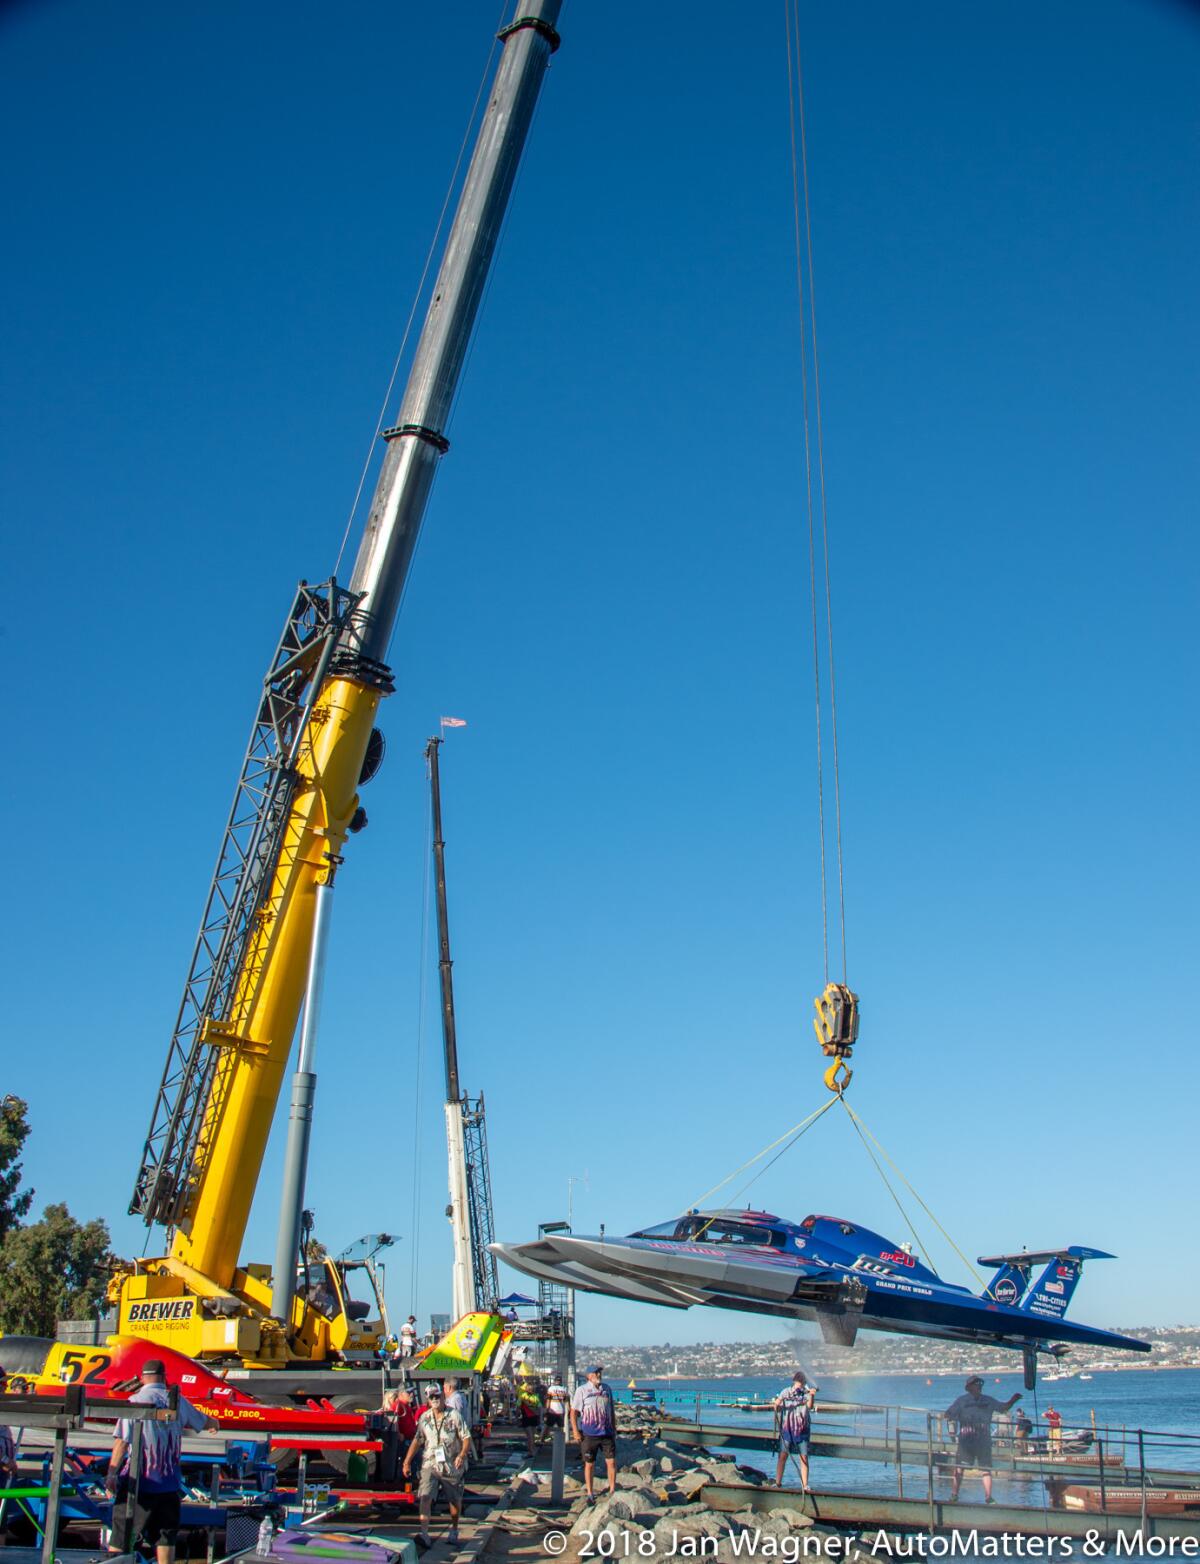 Giant crane lifts a hydroplane as the salt water is washed off.